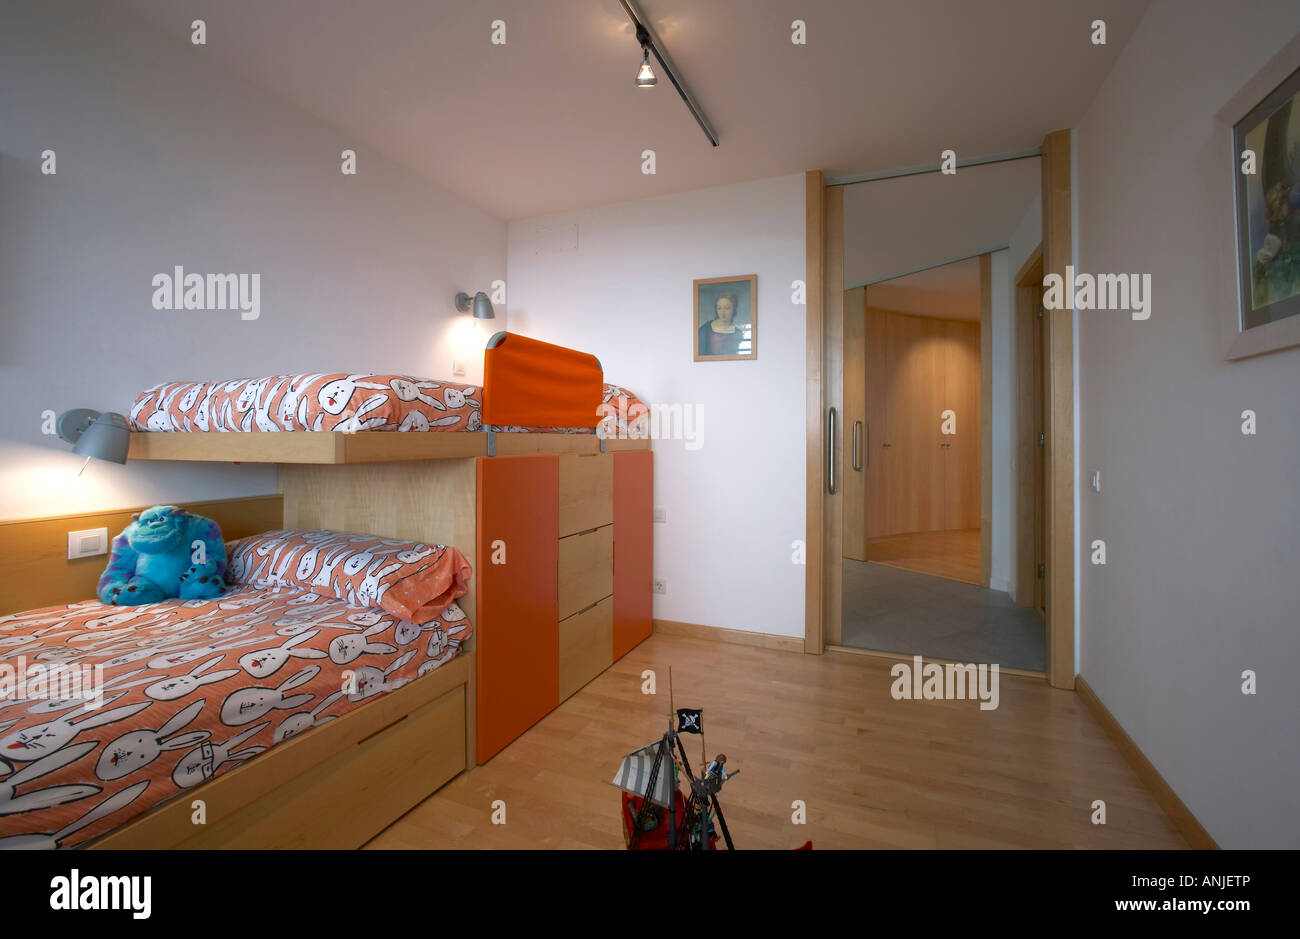 Children s room with stuffed toy on bed wood flooring Stock Photo